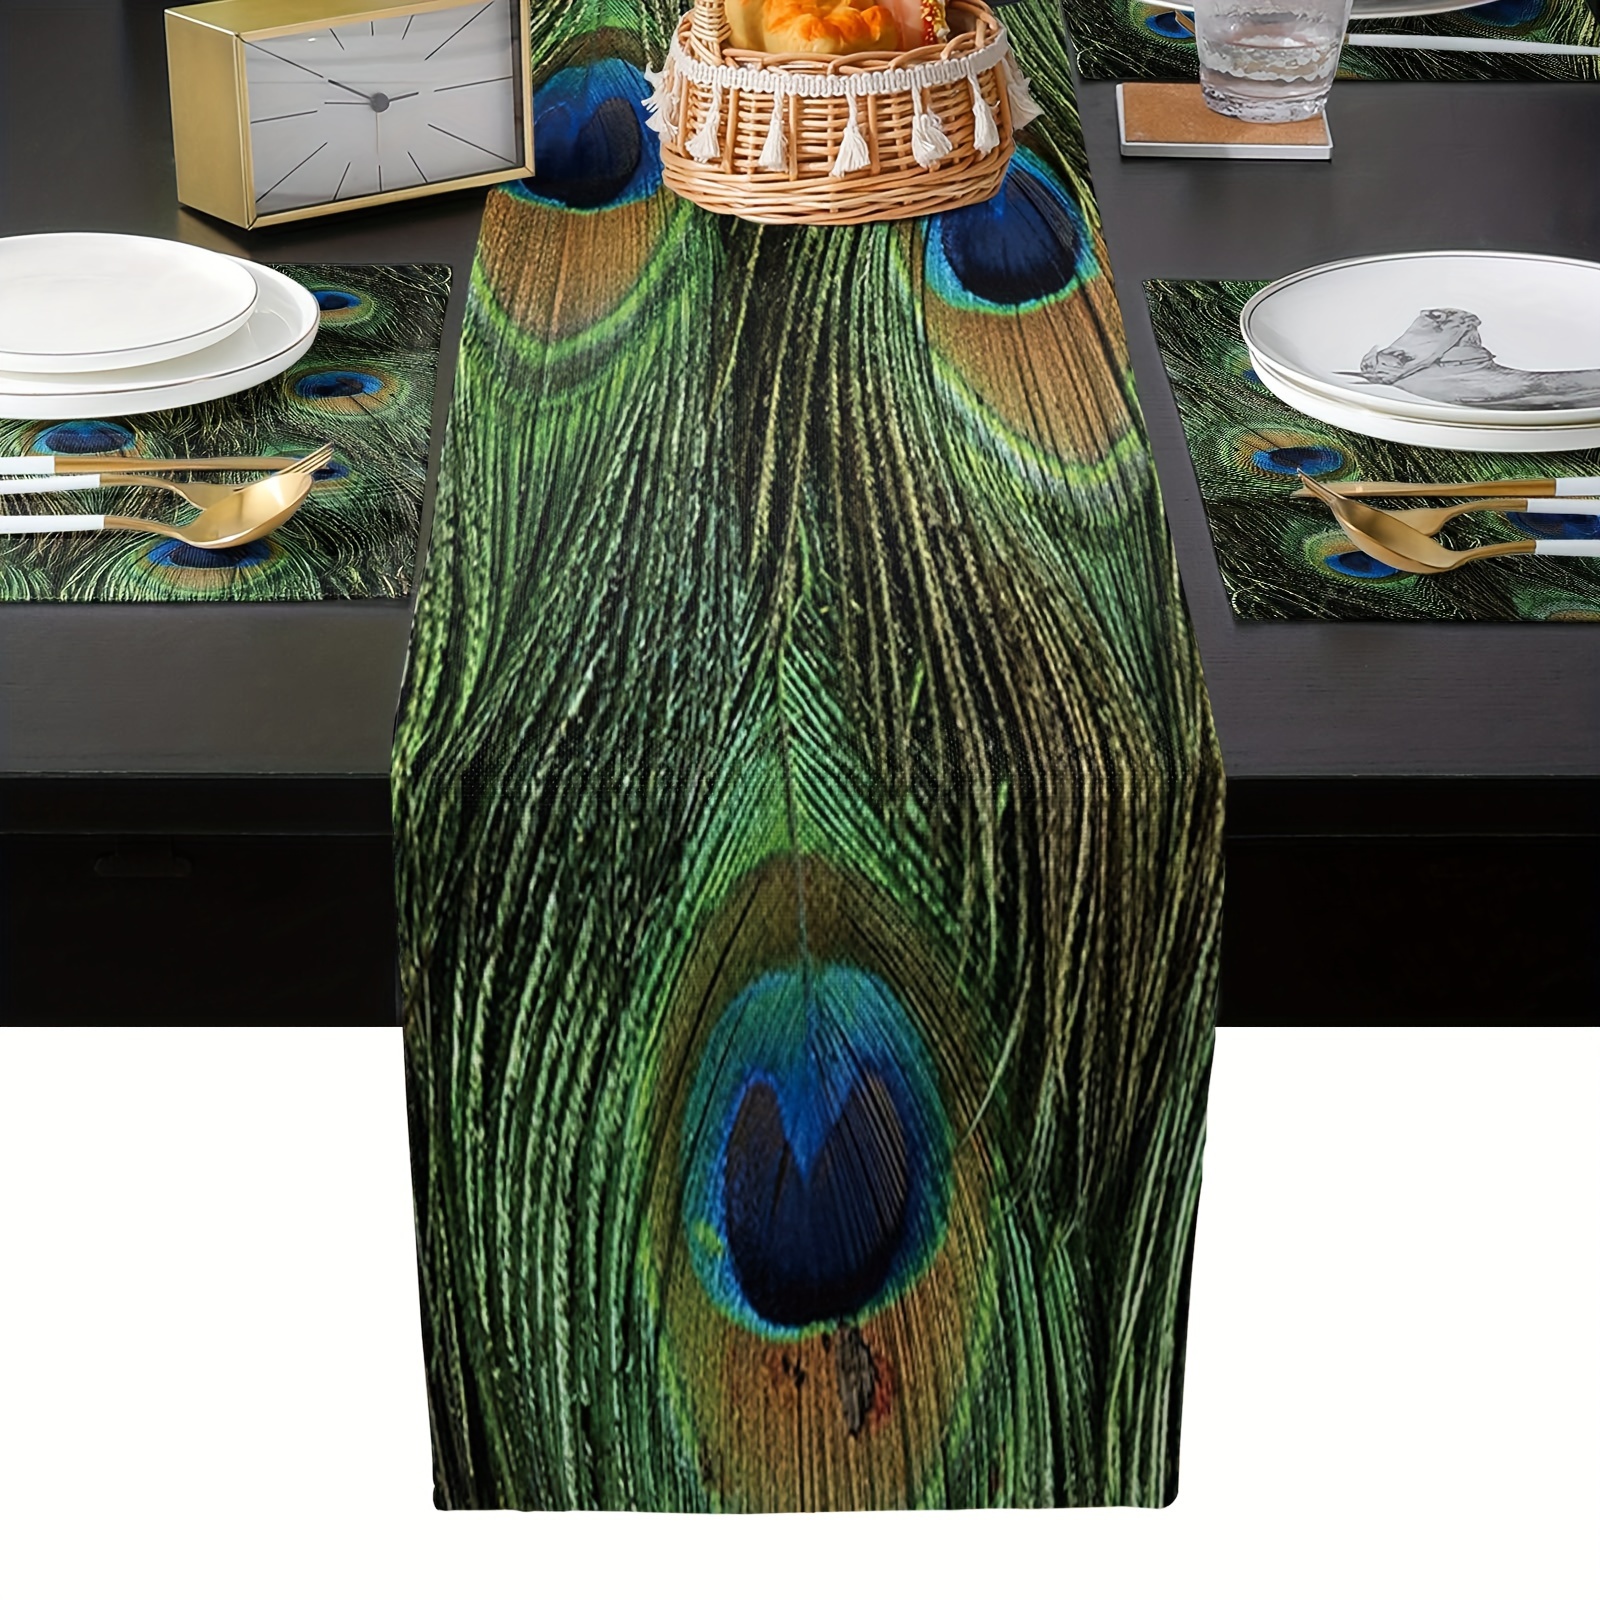 ON SALE Peacock Feather Mat Placemat or Centerpiece Decoration in